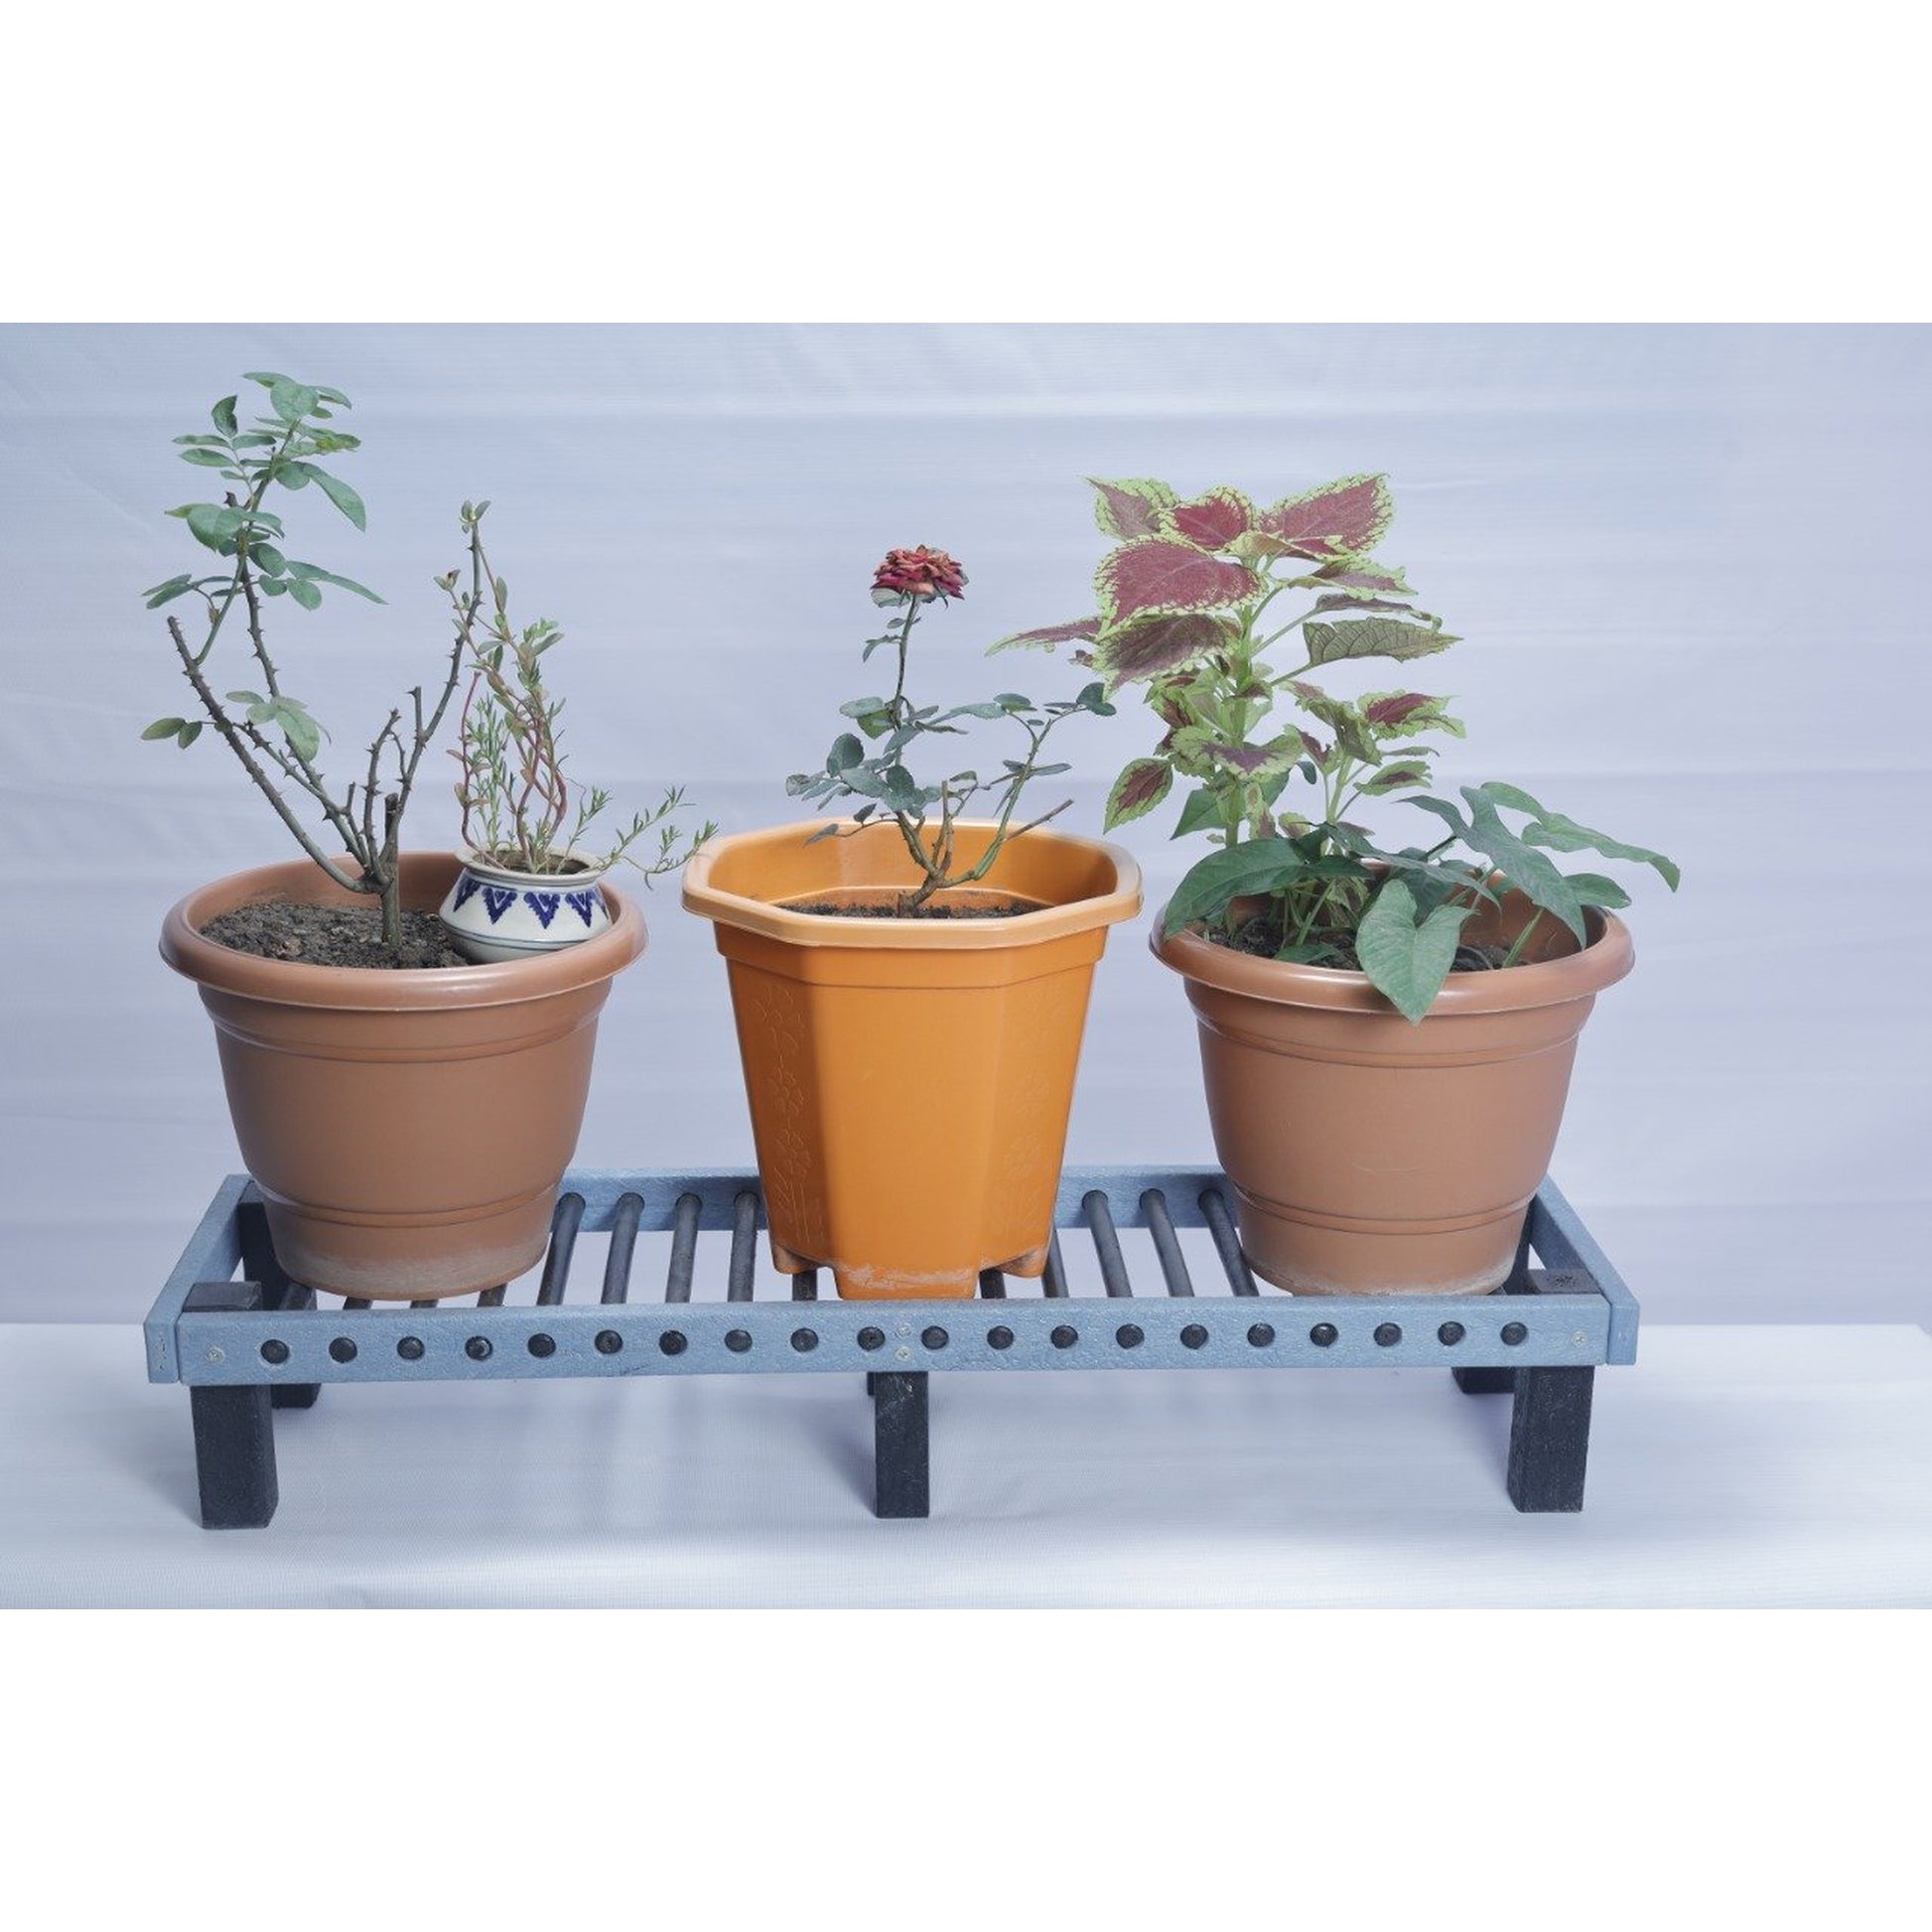 Eco Trio Pot Stand - The Teal Thread